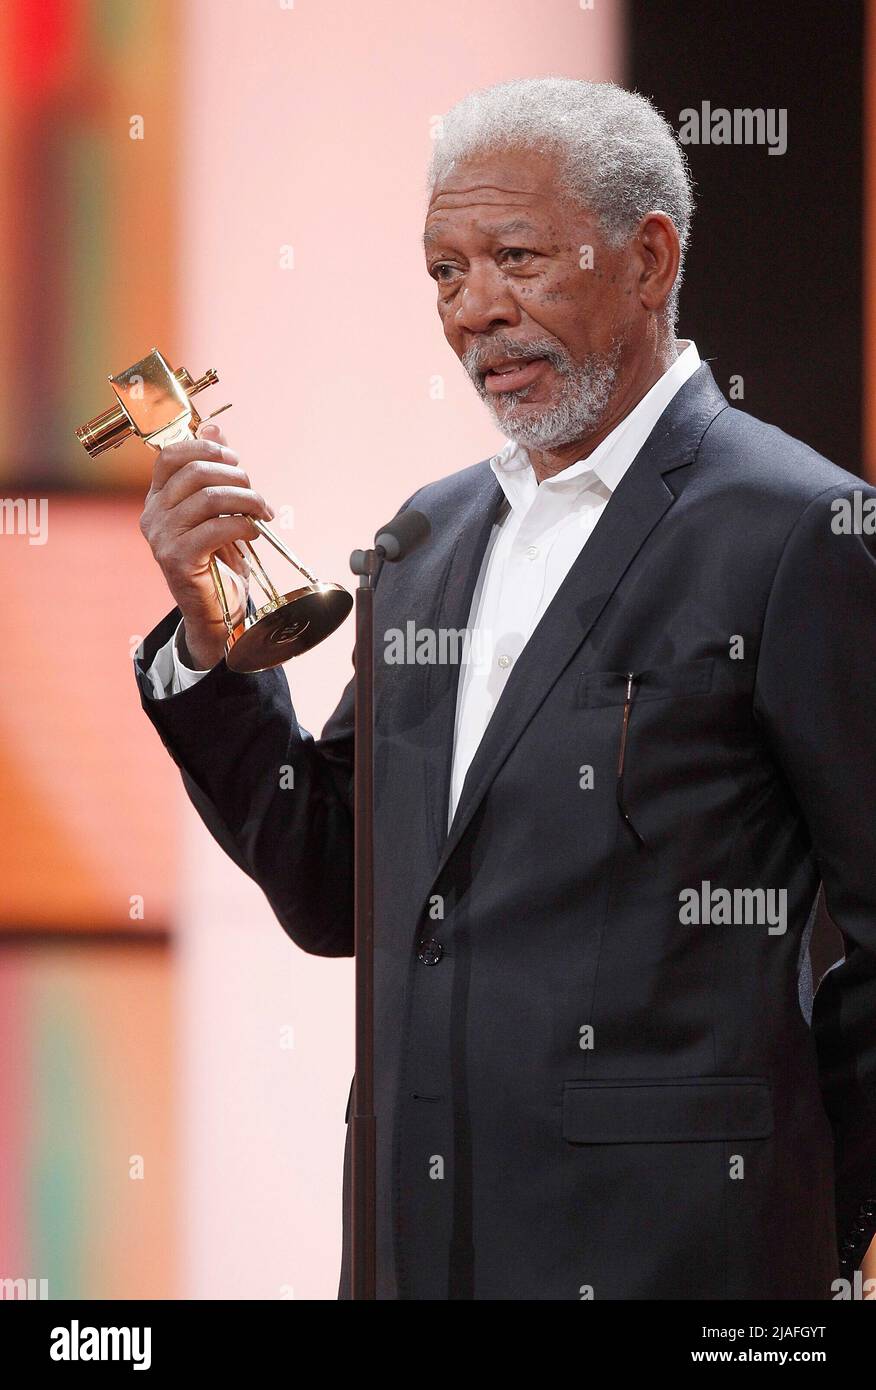 ARCHIVE PHOTO: The actor Morgan FREEMAN celebrates his 85th birthday on June 1, 2022, actor Morgan FREEMAN receives the Golden Camera in the international life's work category, 47th presentation of the Golden Camera, the film and television prize of the HOERZU magazine in the Axel publishing house in Berlin Springer AG in Berlin on February 4th, 2012. pool photo Stock Photo